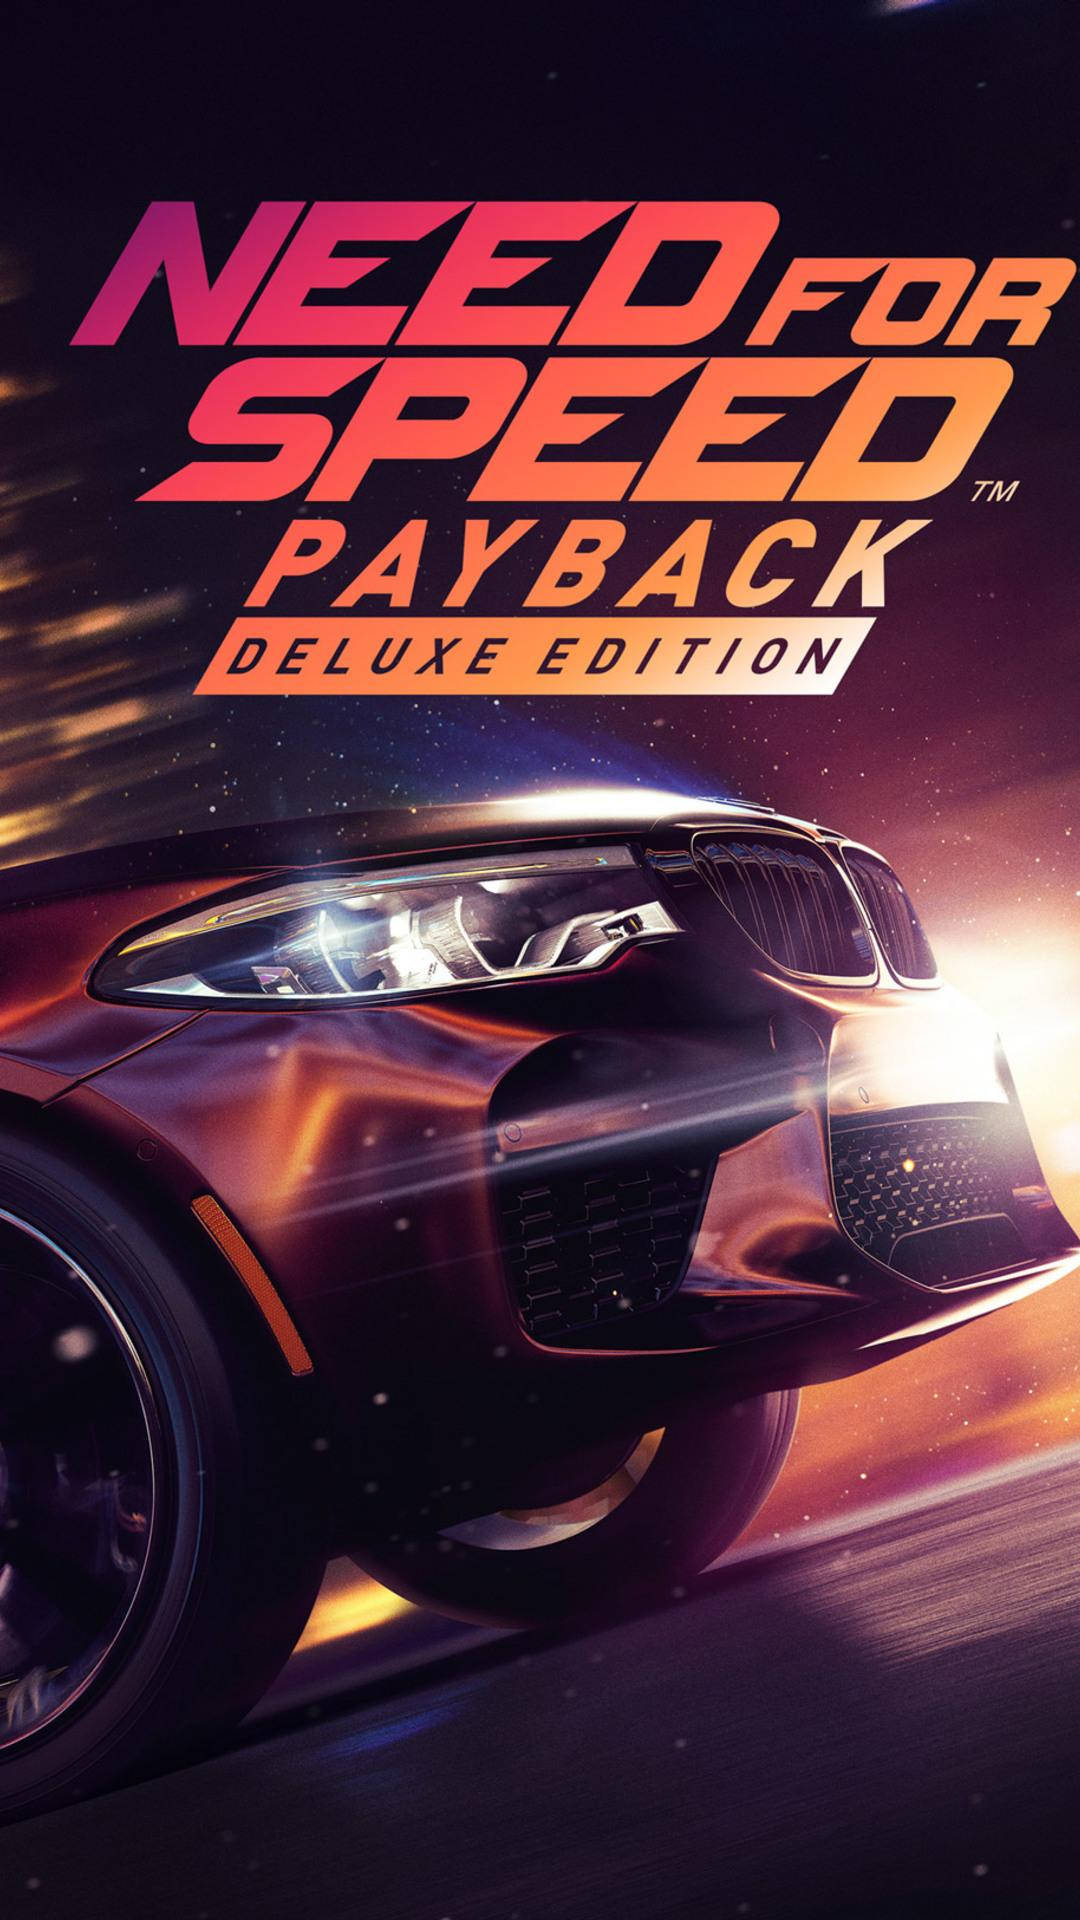 Behov For Hastighed Payback Bil Forlygter Iphone Wallpaper